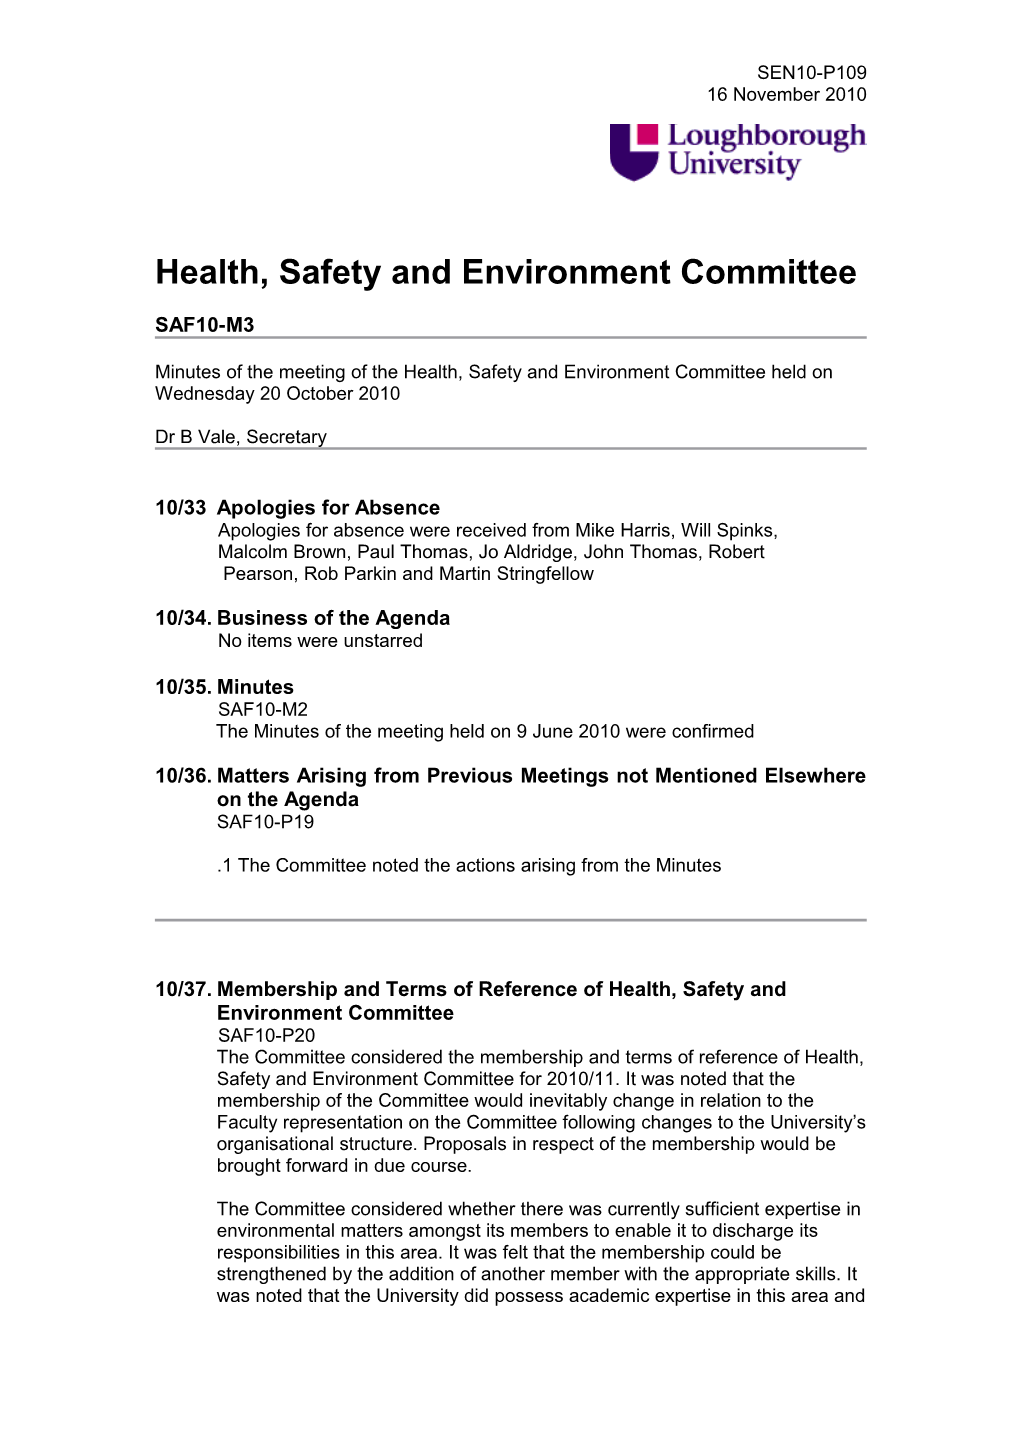 Health, Safety and Environment Committee